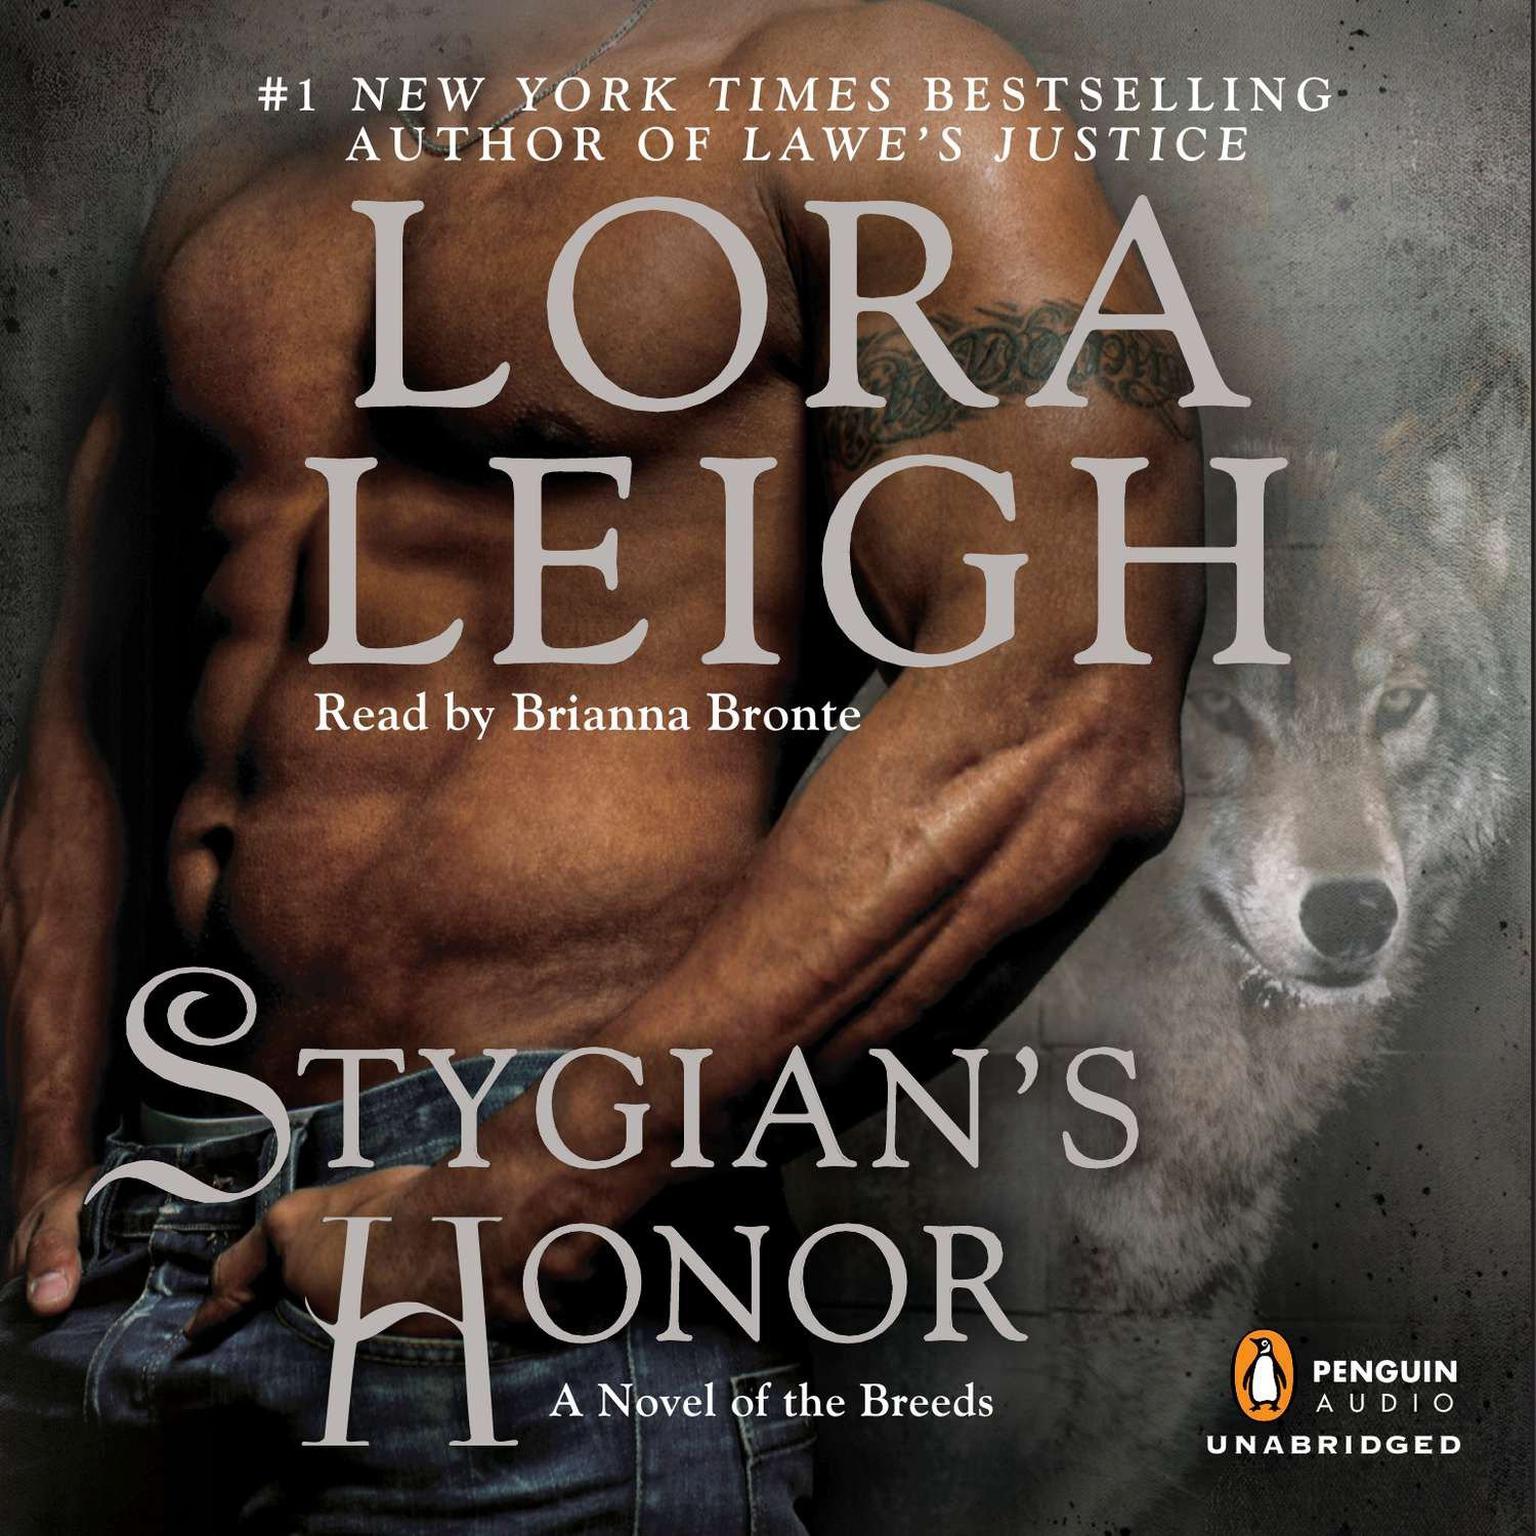 Stygians Honor: A Novel of the Breeds Audiobook, by Lora Leigh